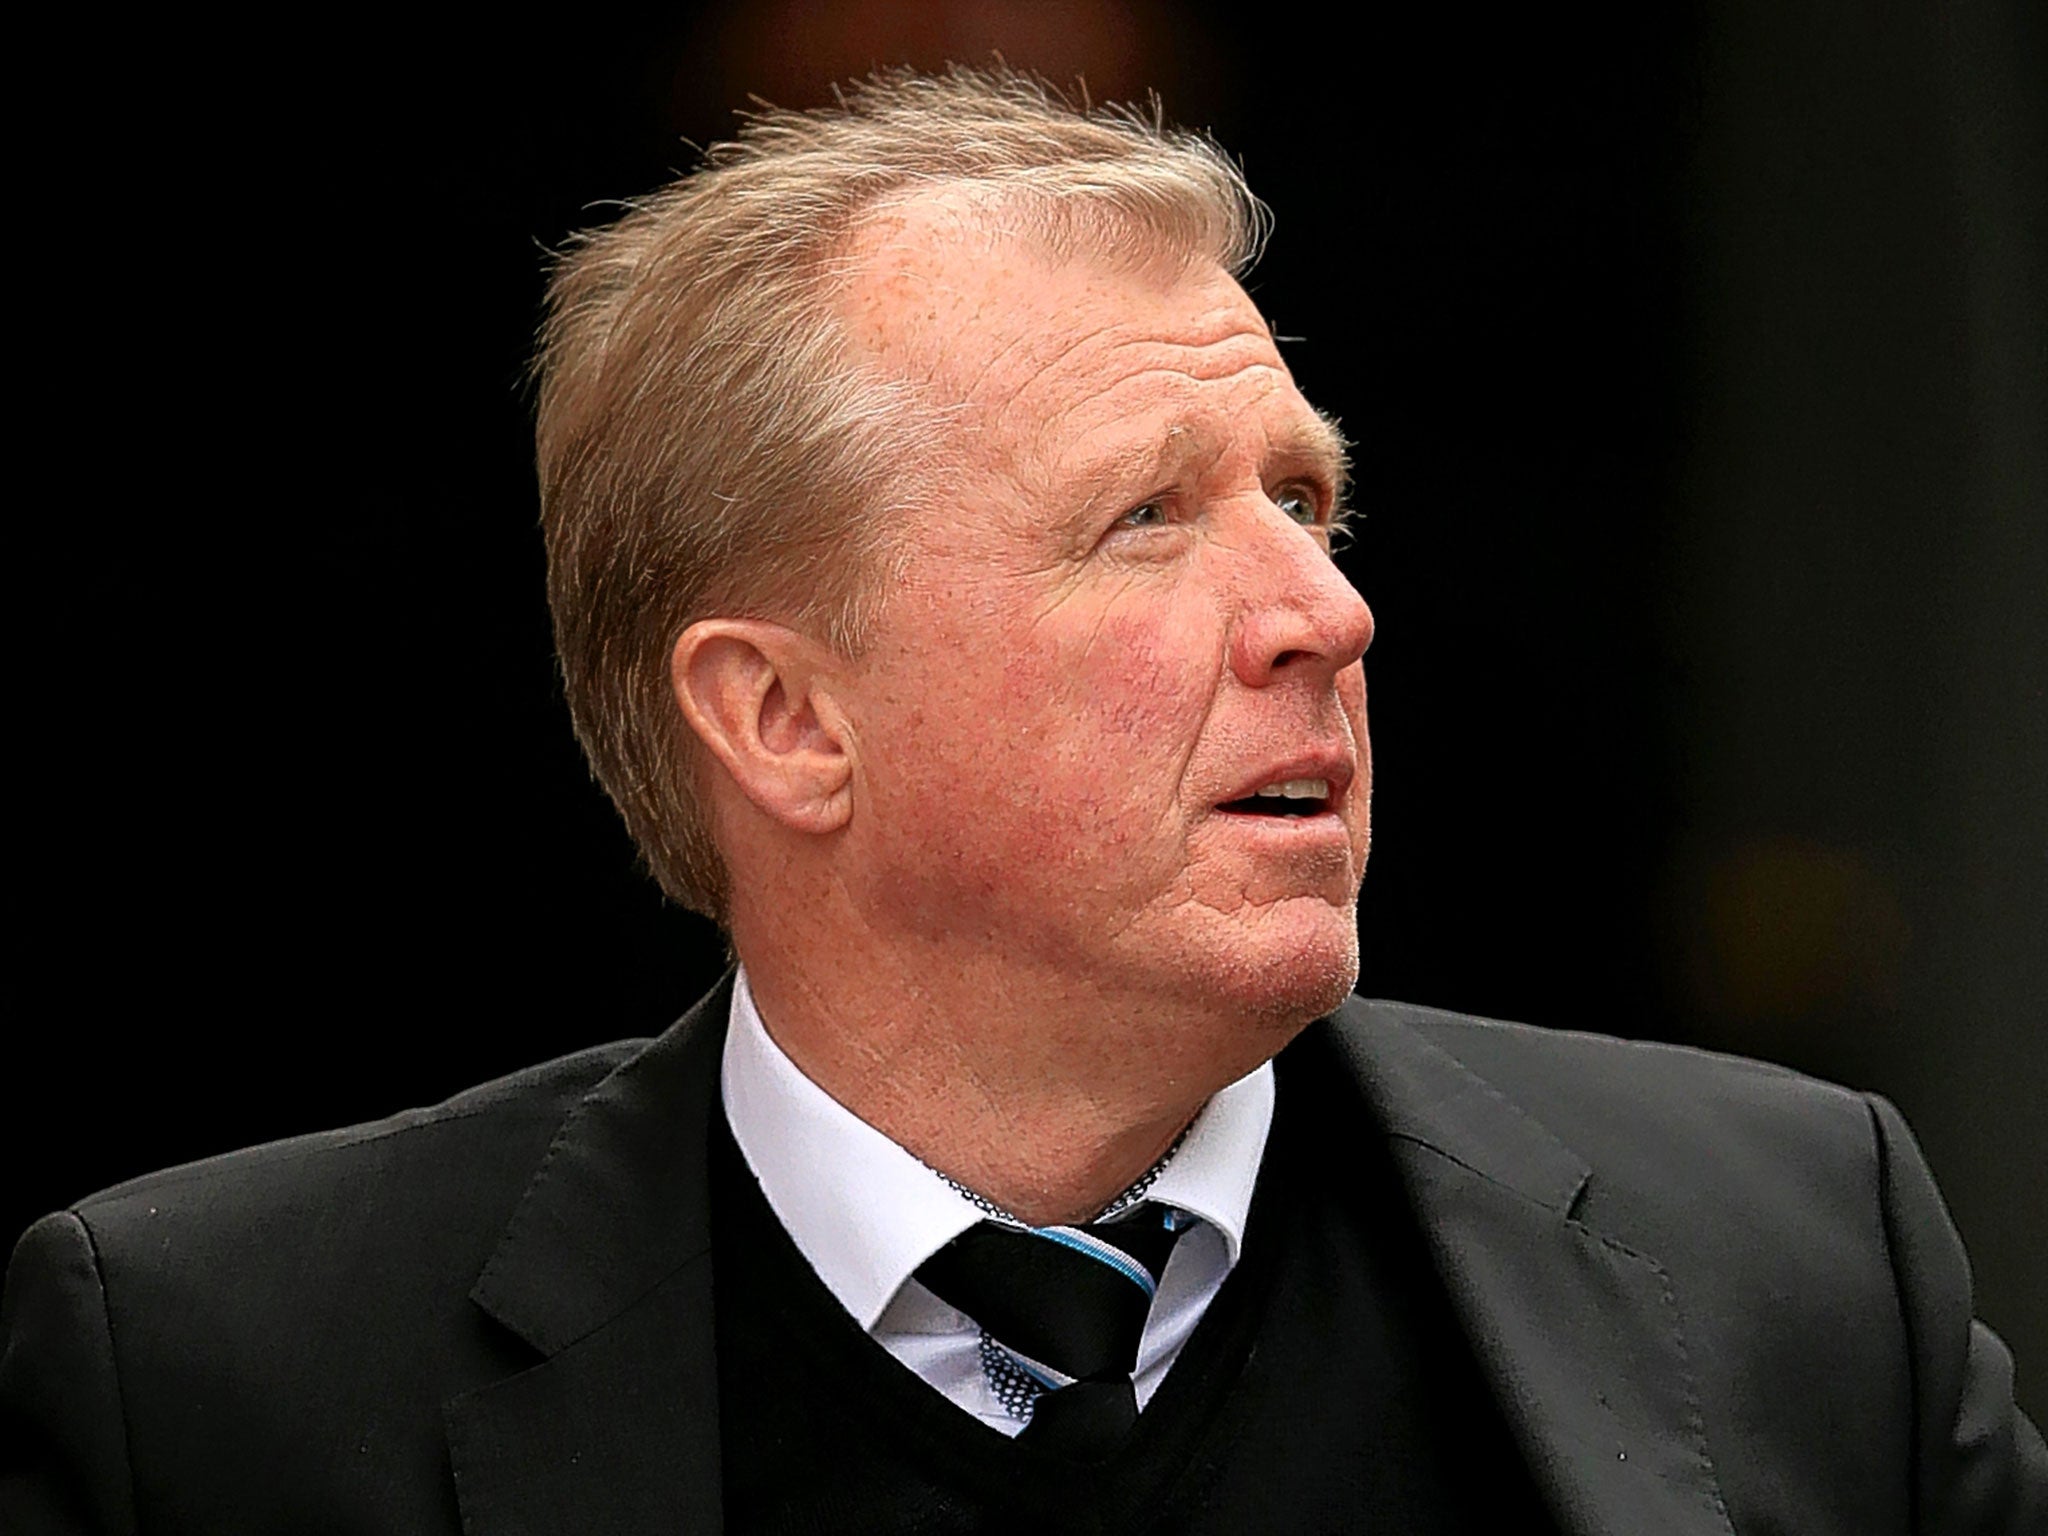 Steve McClaren’s optimism has been tested by his team’s lack of confidence